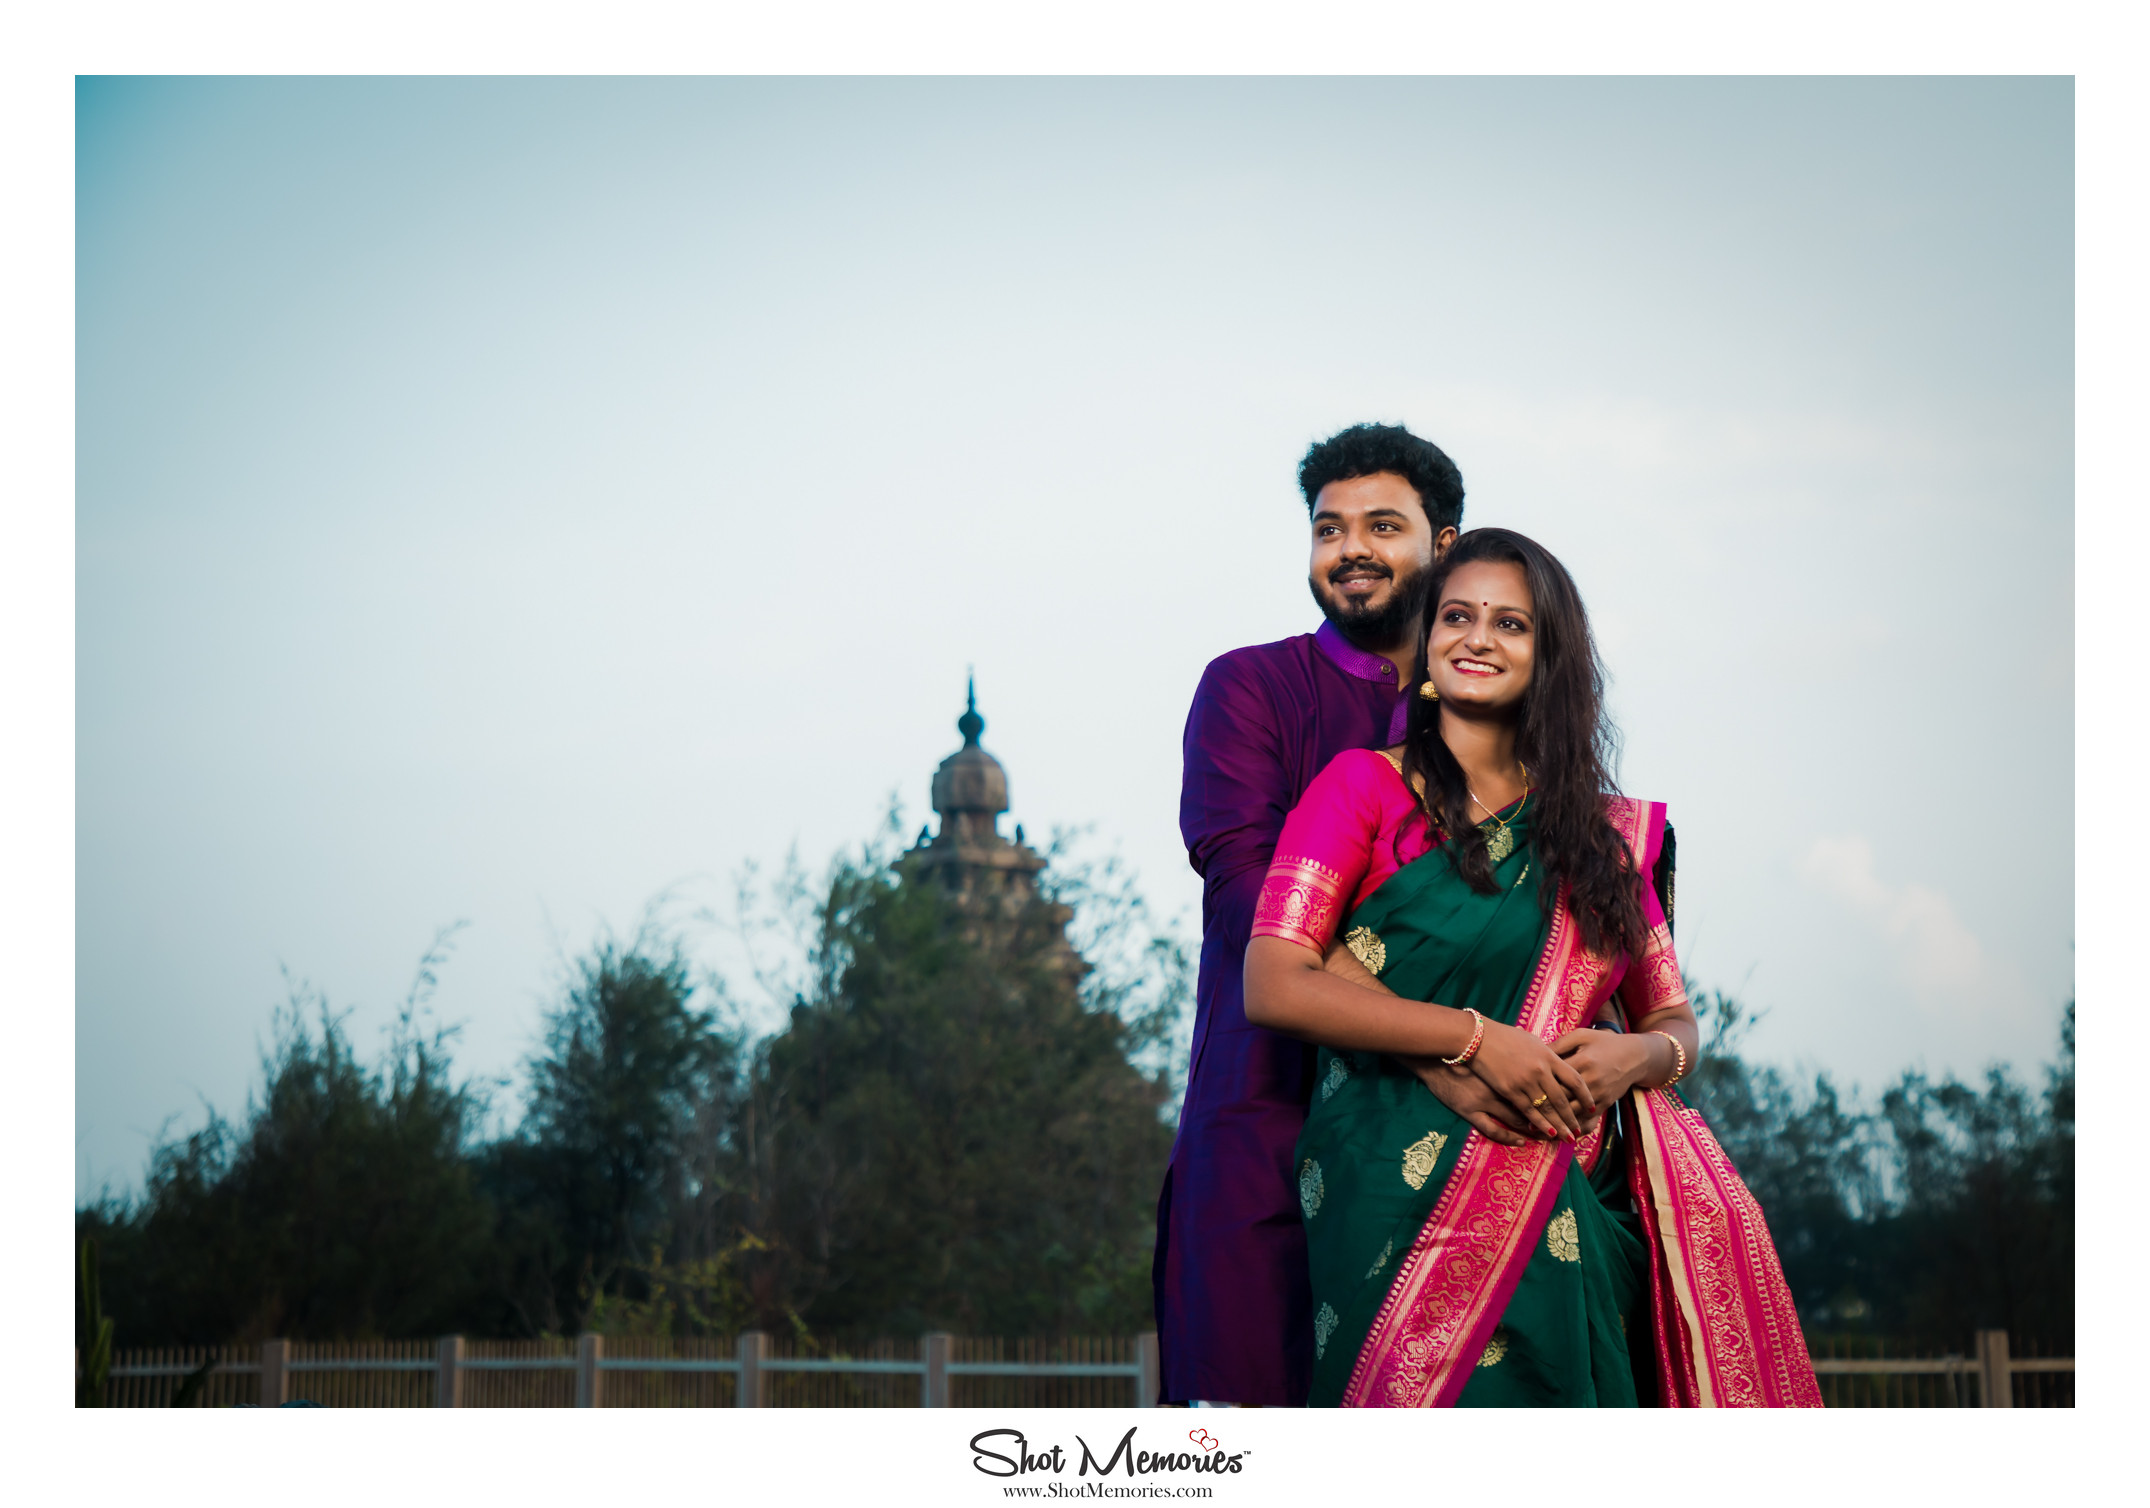 Free Images : Vikas, Jyoti, pre wedding, India Wedding, indian couple, Love  images, engagement pics, pre wedding shoot, india, pre wedding couple,  photograph, blue, green, red, tree, natural environment, yellow, lady, male,